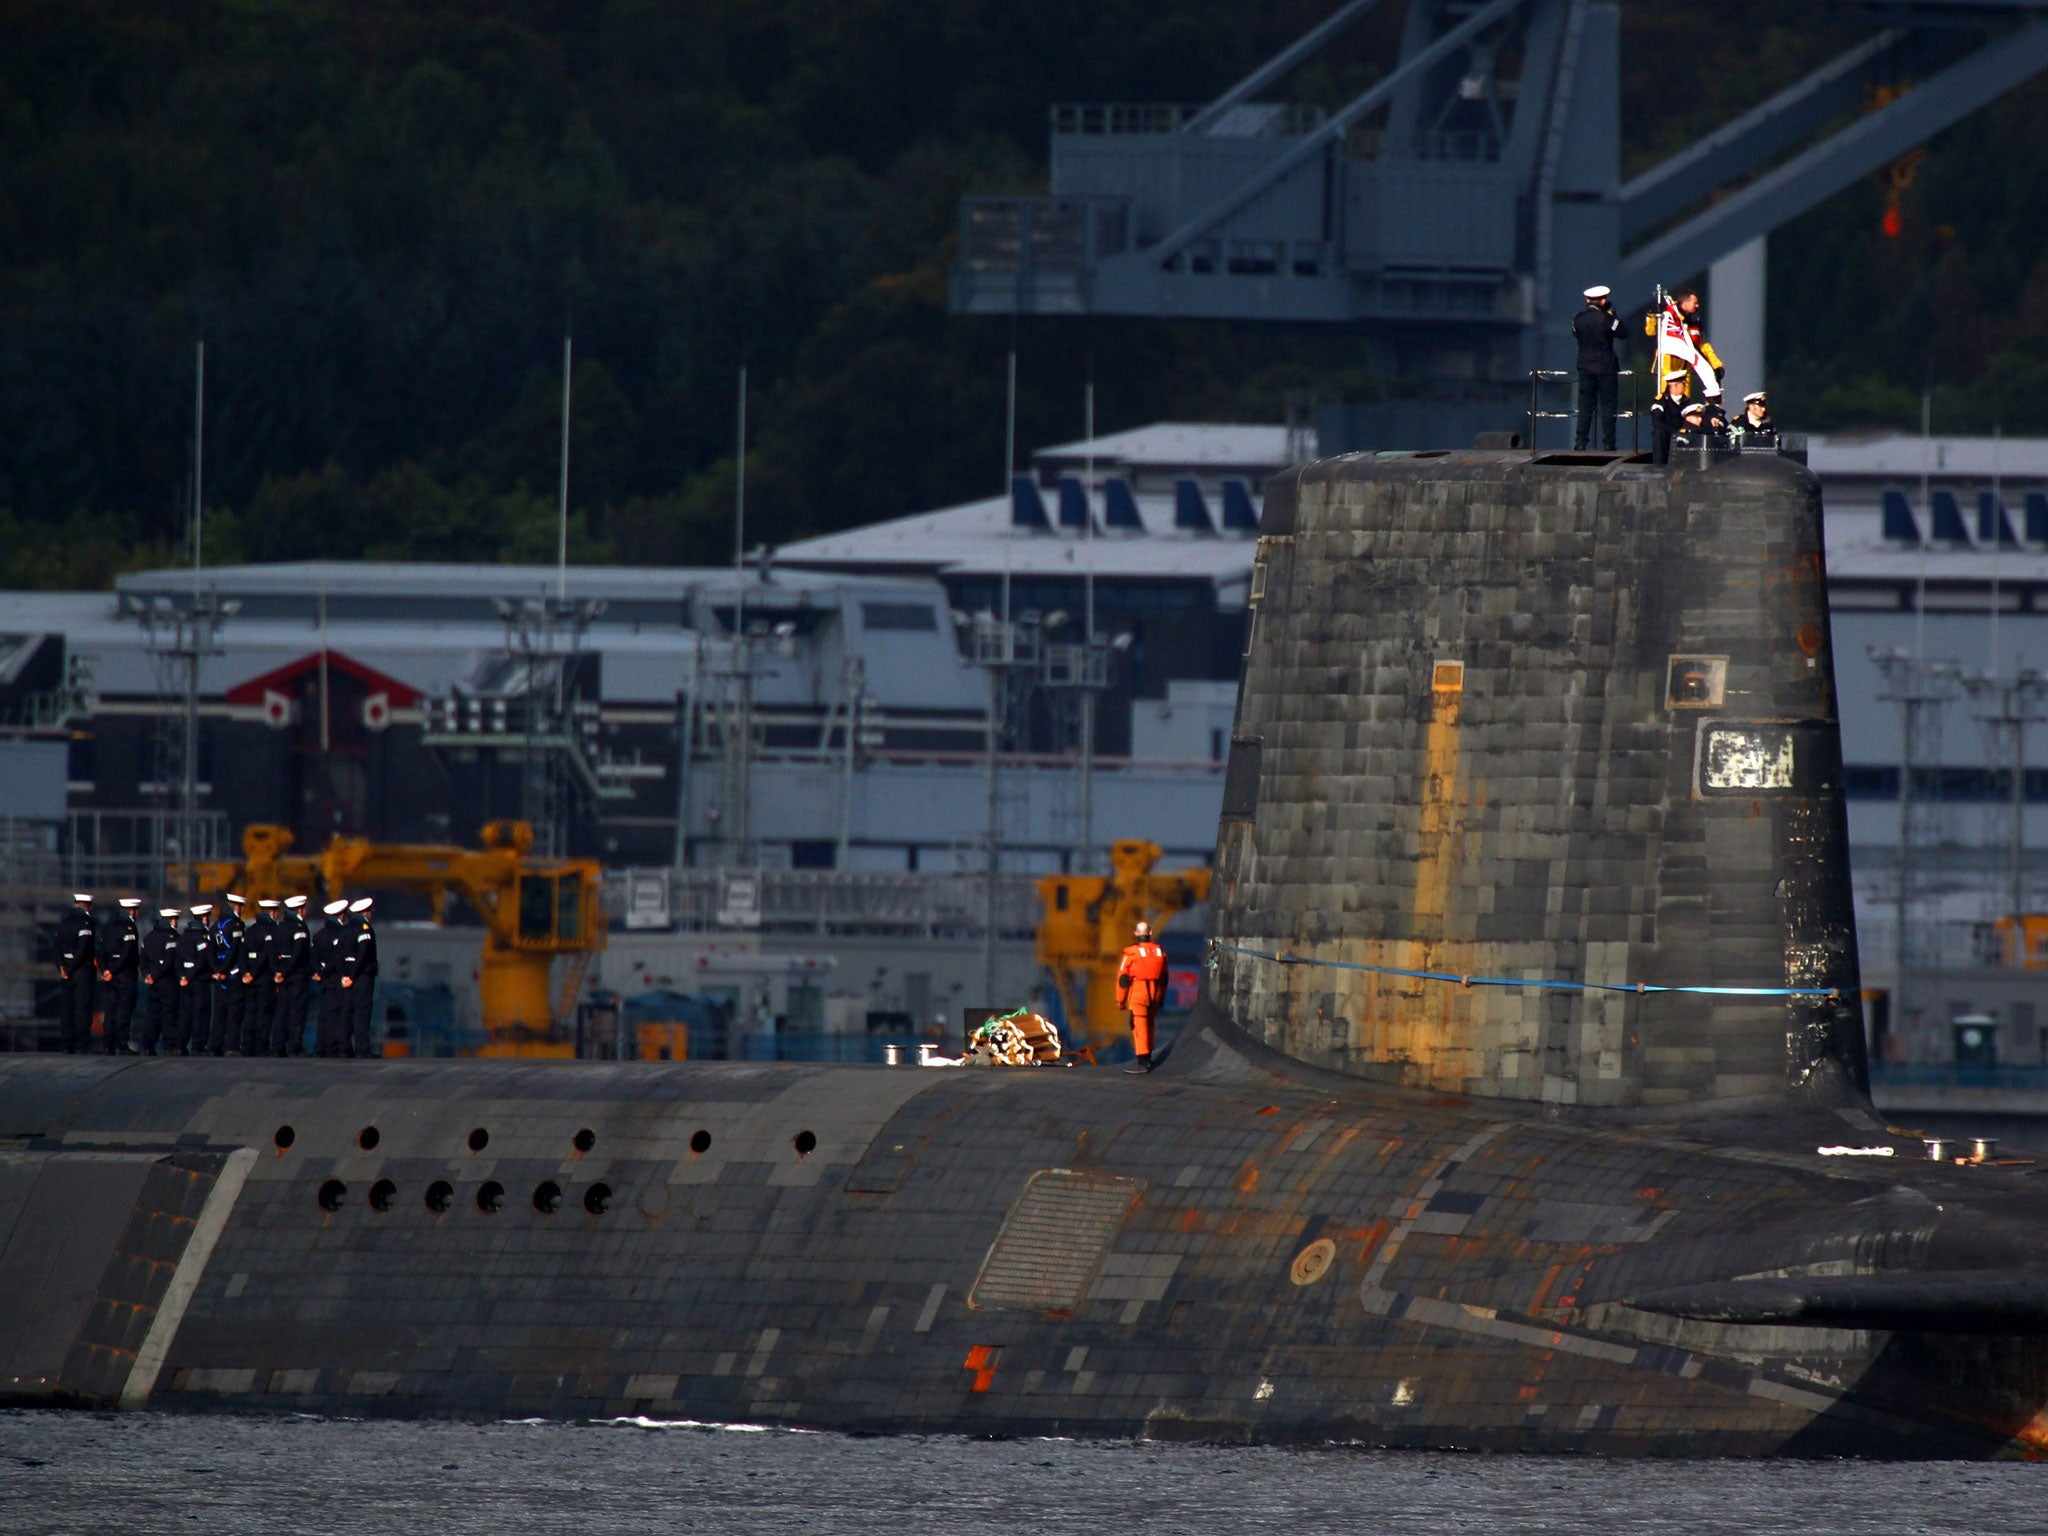 HMS Vanguard is one of the Trident nuclear submarines docked at the Faslane base on the river Clyde in Helensburgh, Scotland